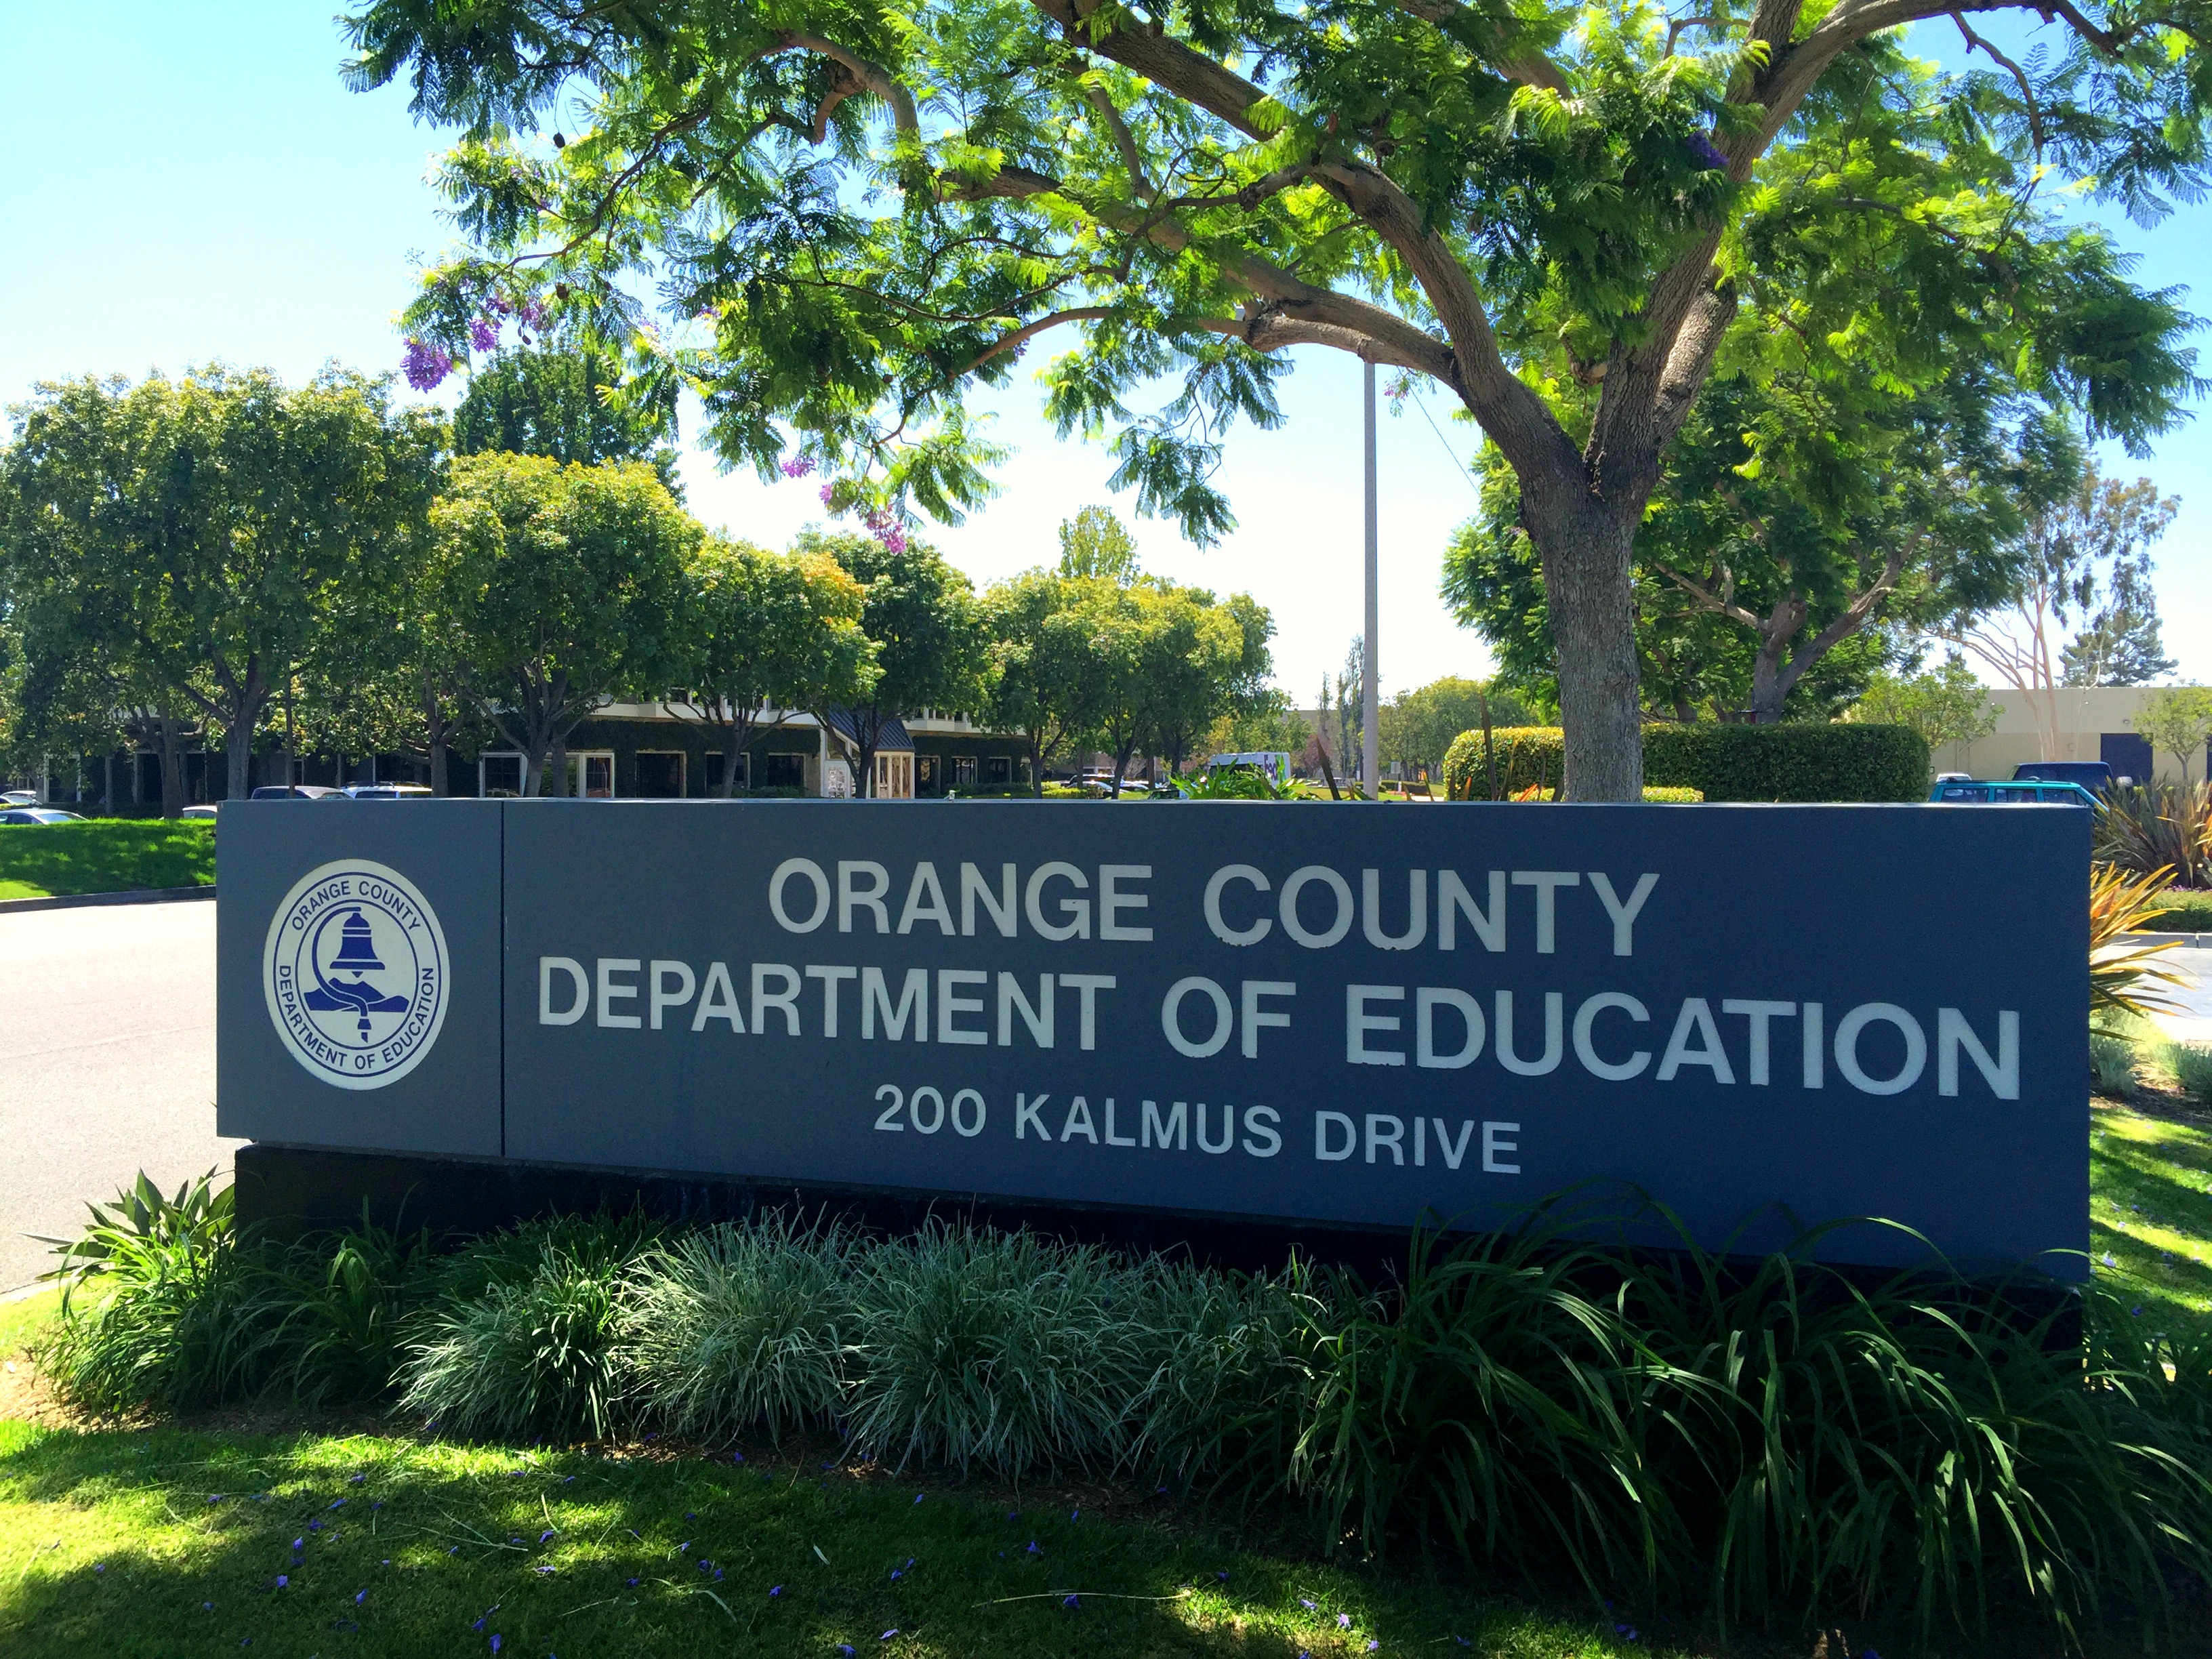 An image of the OCDE sign at the administrative campus on Kalmus